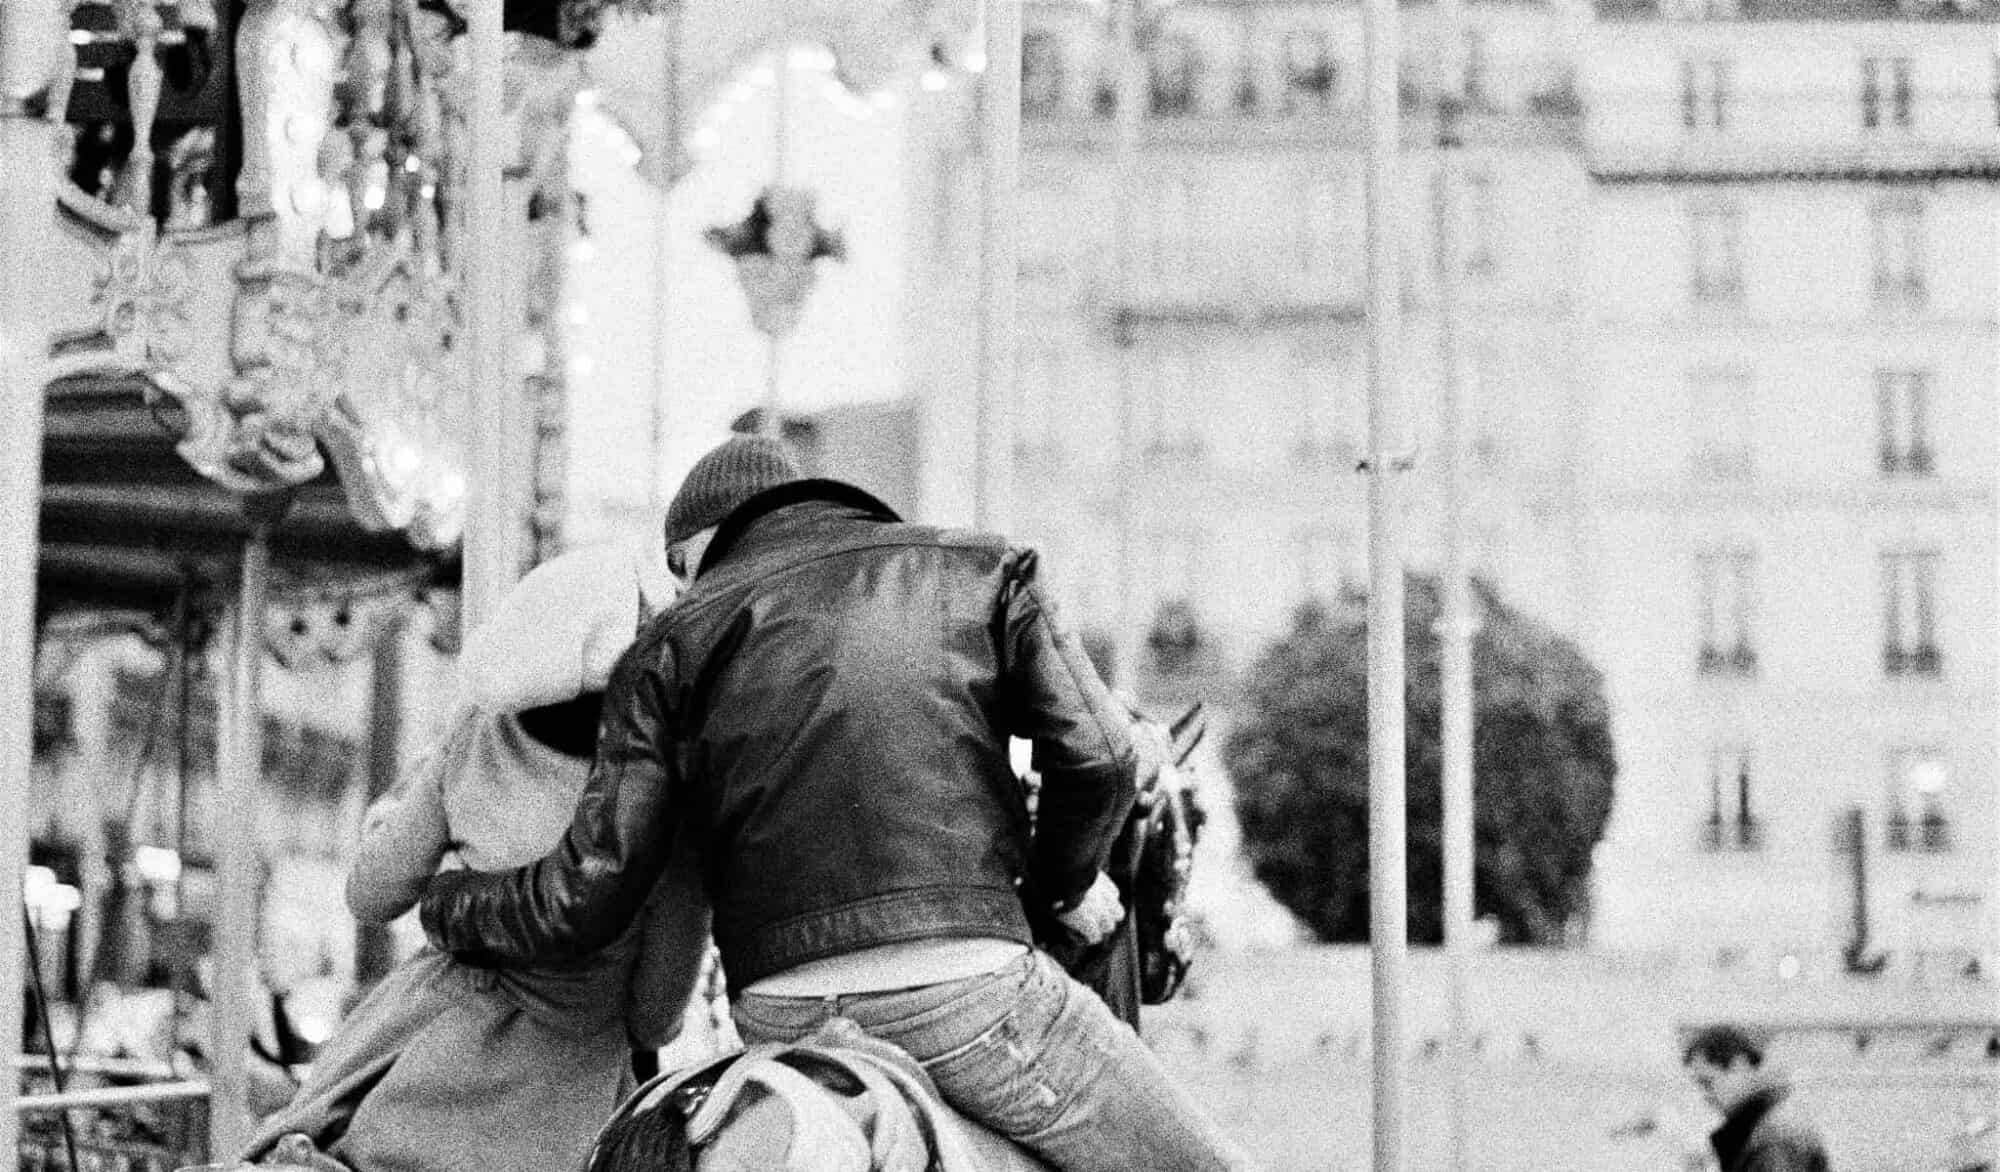 Couple in each others arms kissing in Paris pictured in black and white.